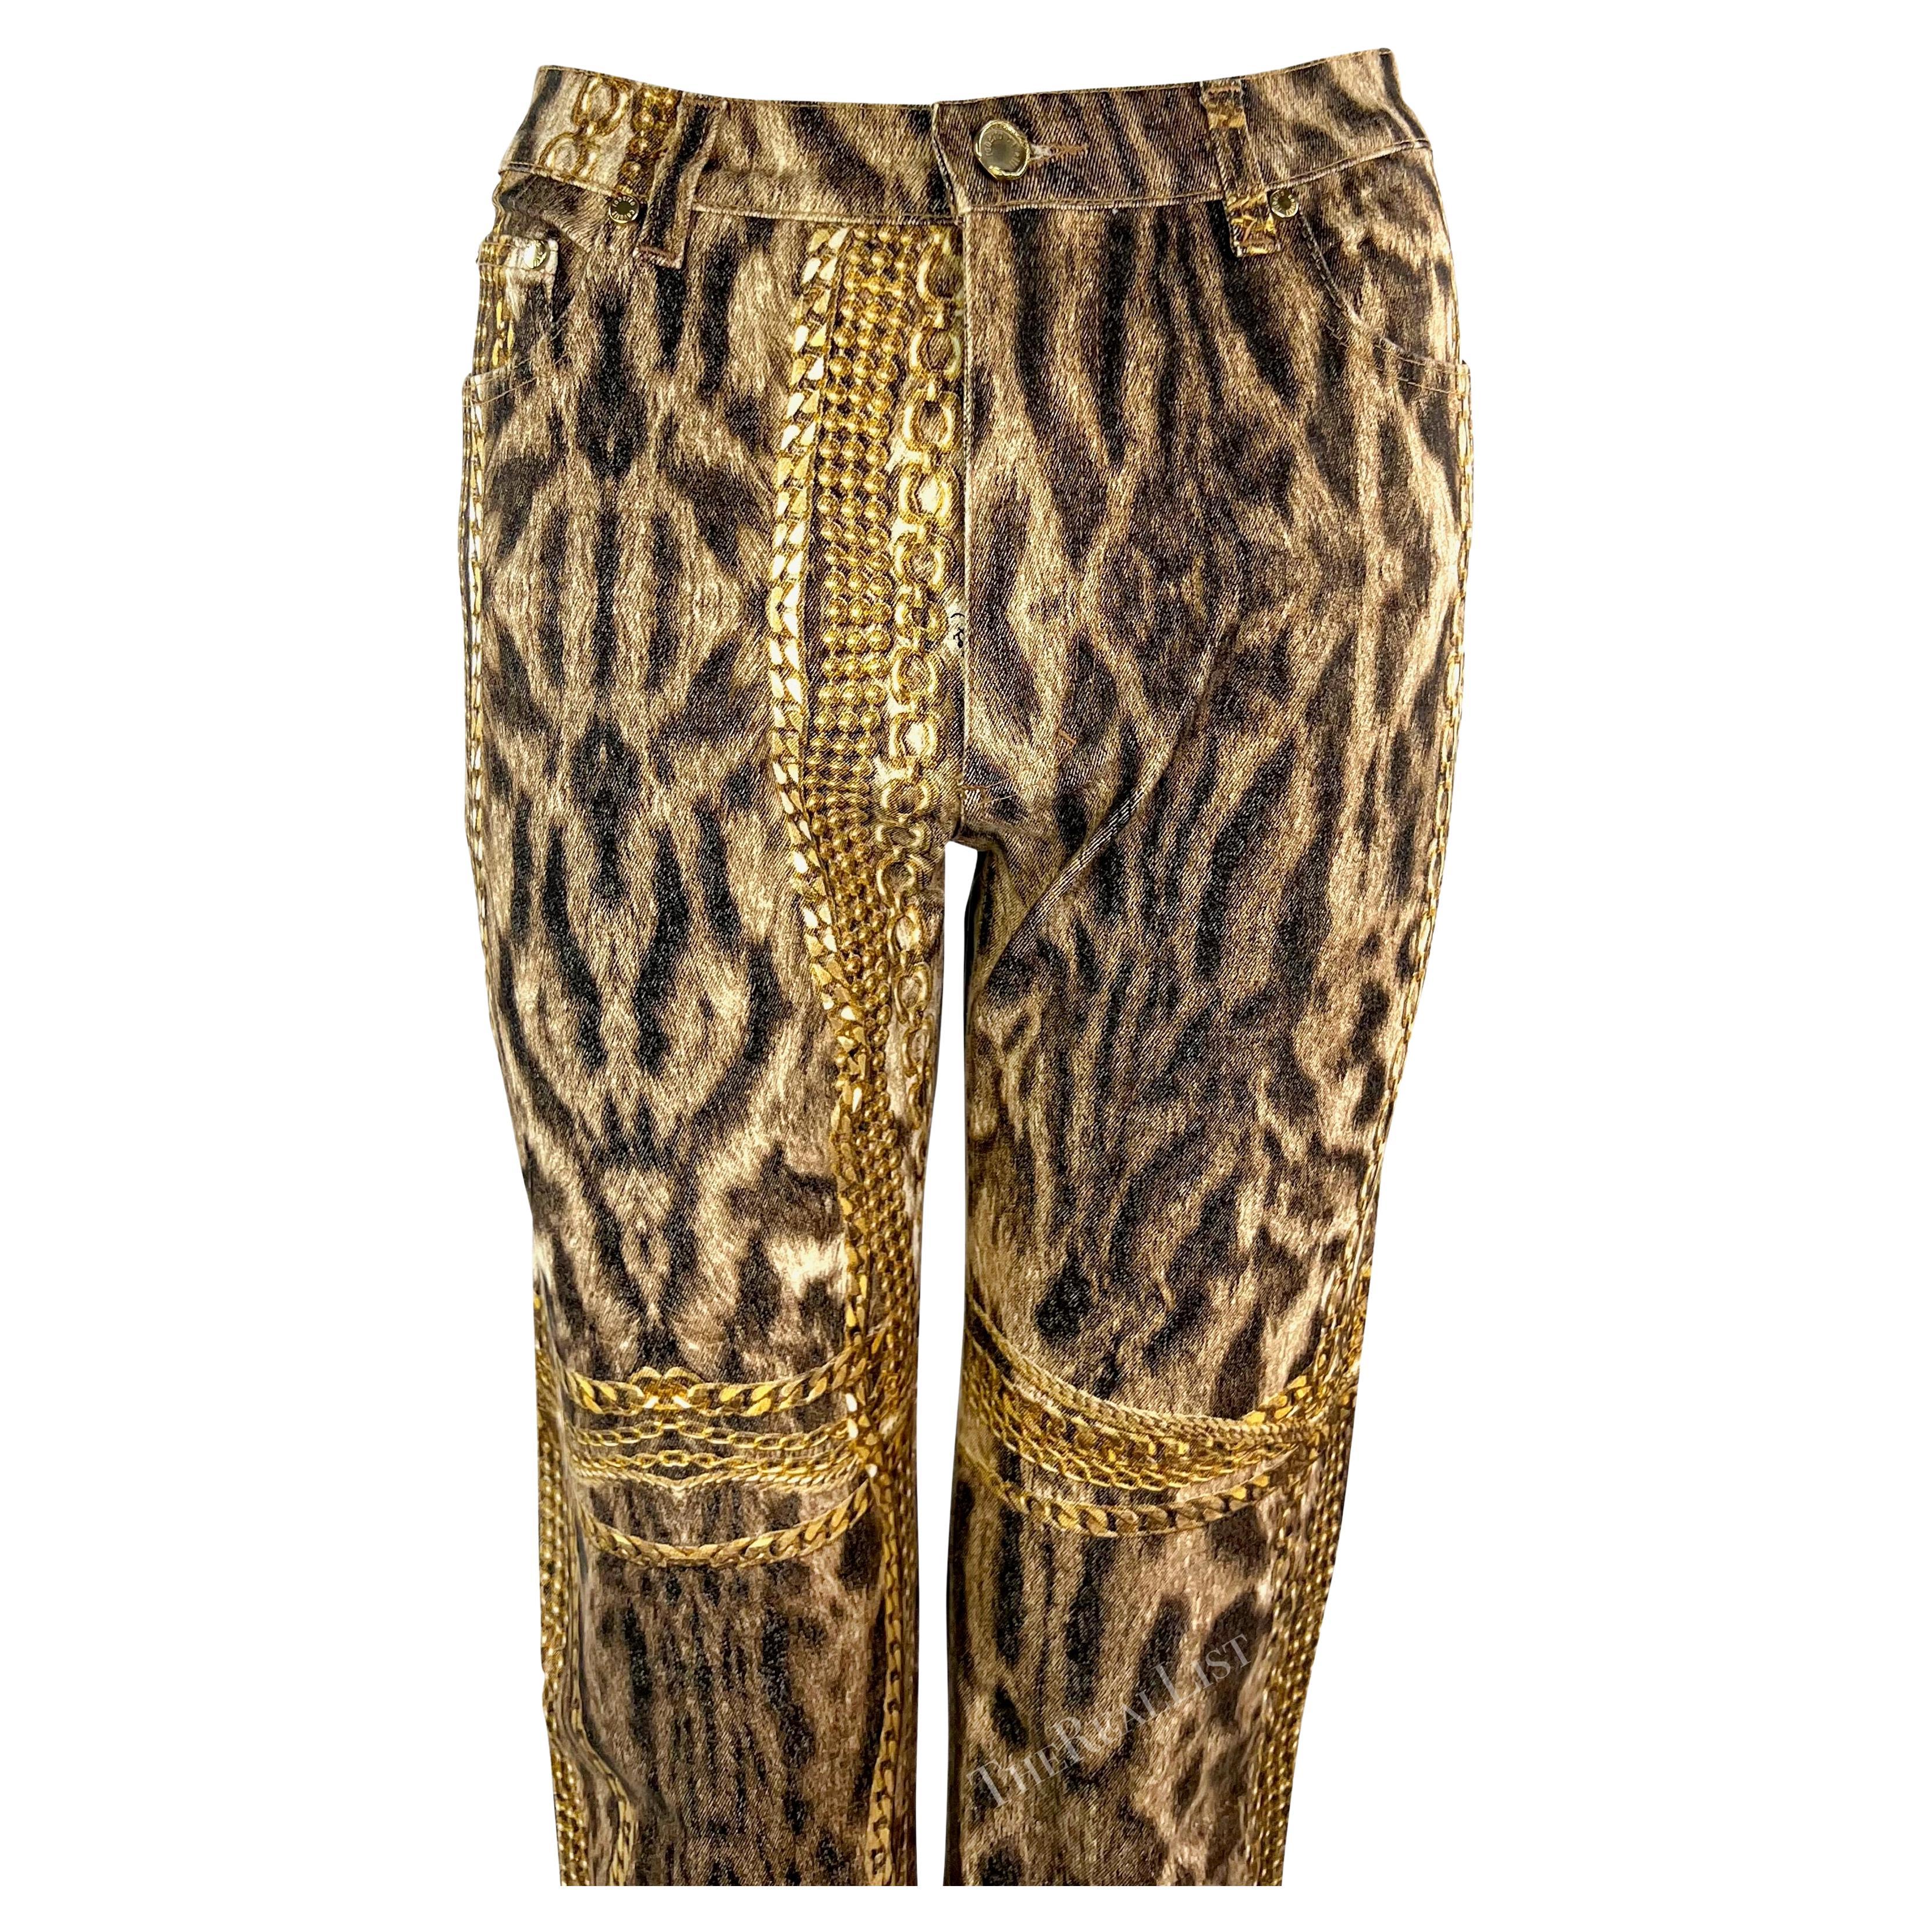 Presenting a pair of cheetah print denim Roberto Cavalli pants. From the Fall/Winter 2003 collection, these fabulous pants feature a cheetah print with gold chains throughout. The perfect encapsulation of early 2000s Roberto Cavalli, these cheetah